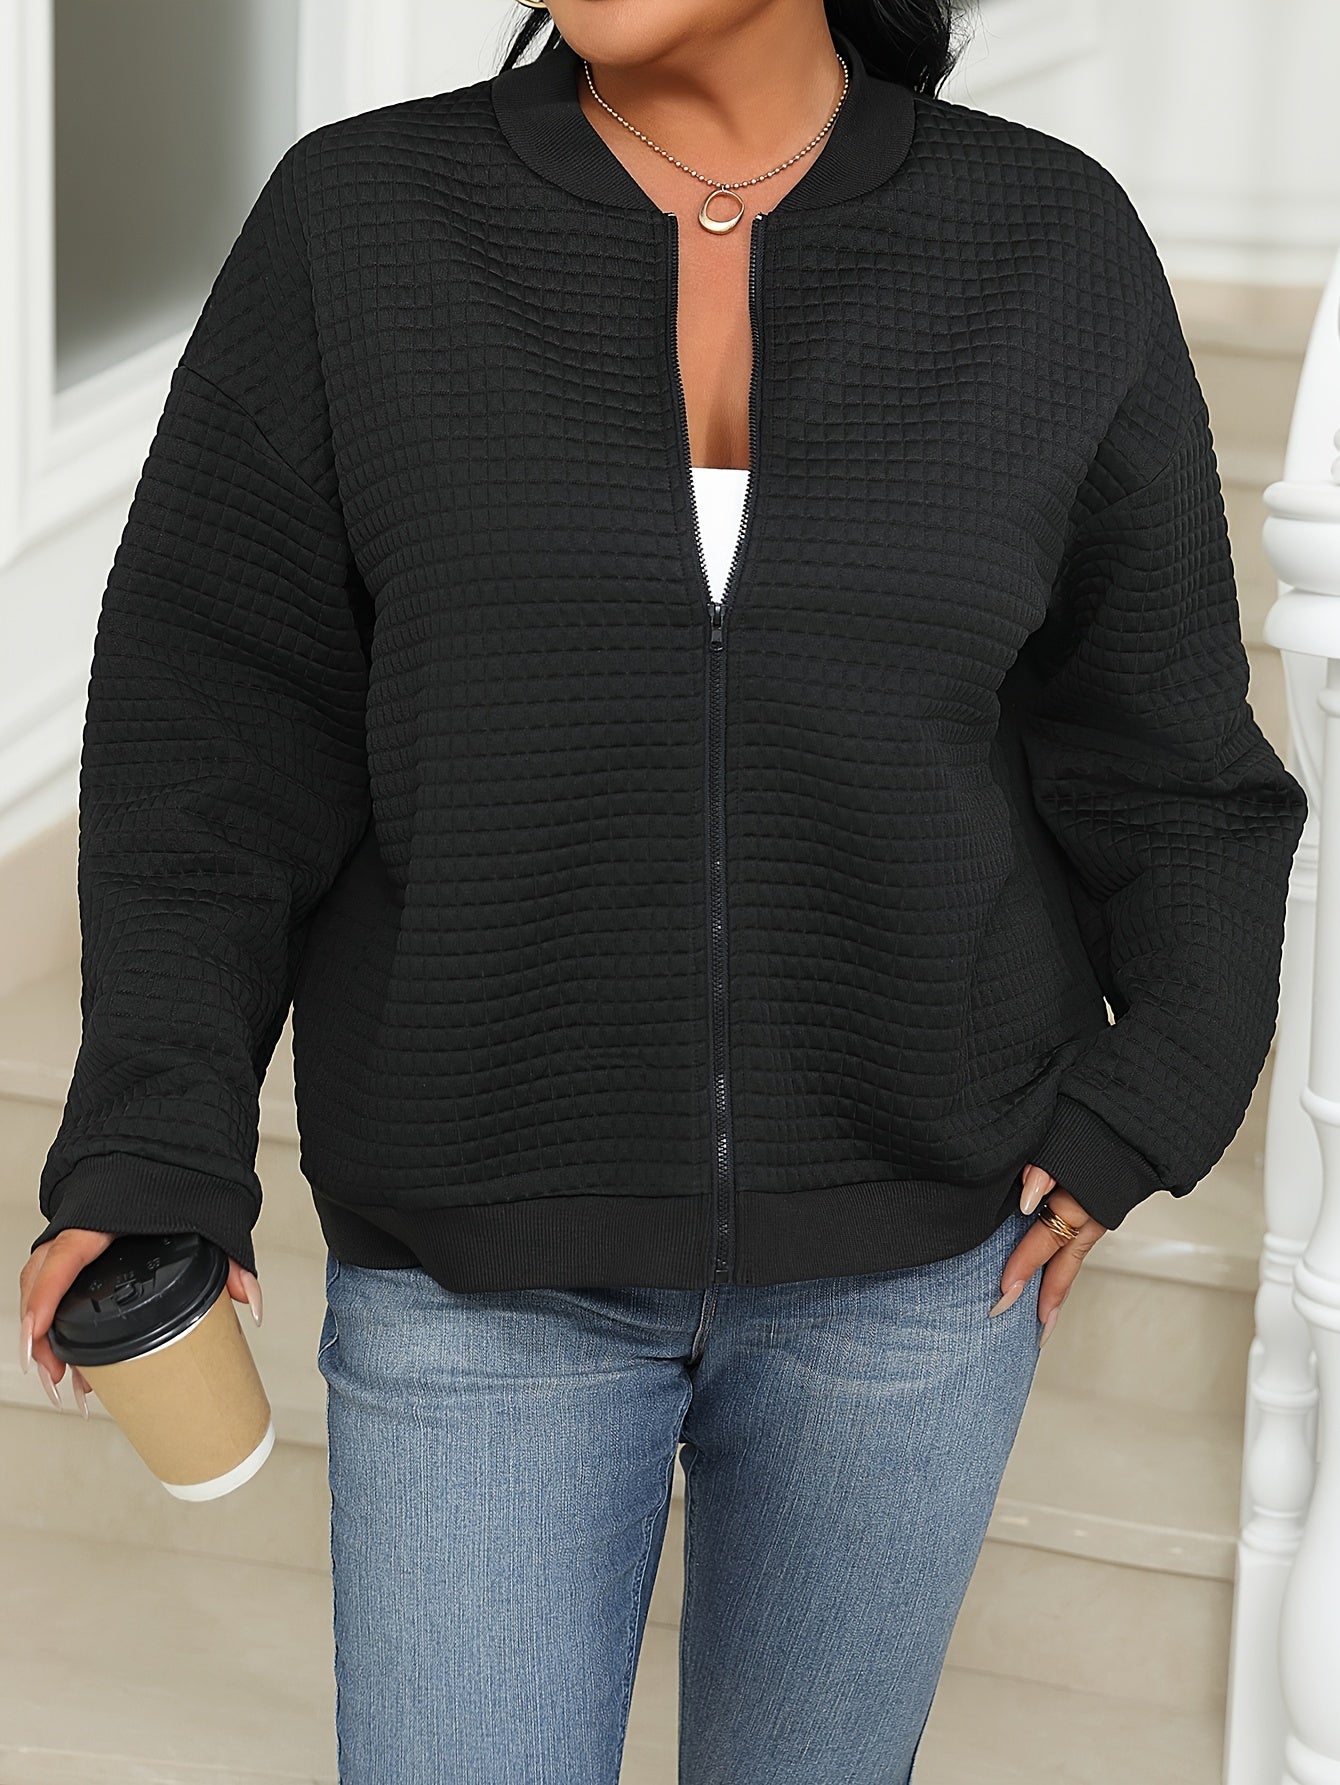 Plus Size Casual Jacket, Women's Plus Solid Textured Zipper Long Sleeve Slight Stretch Bomber Jacket